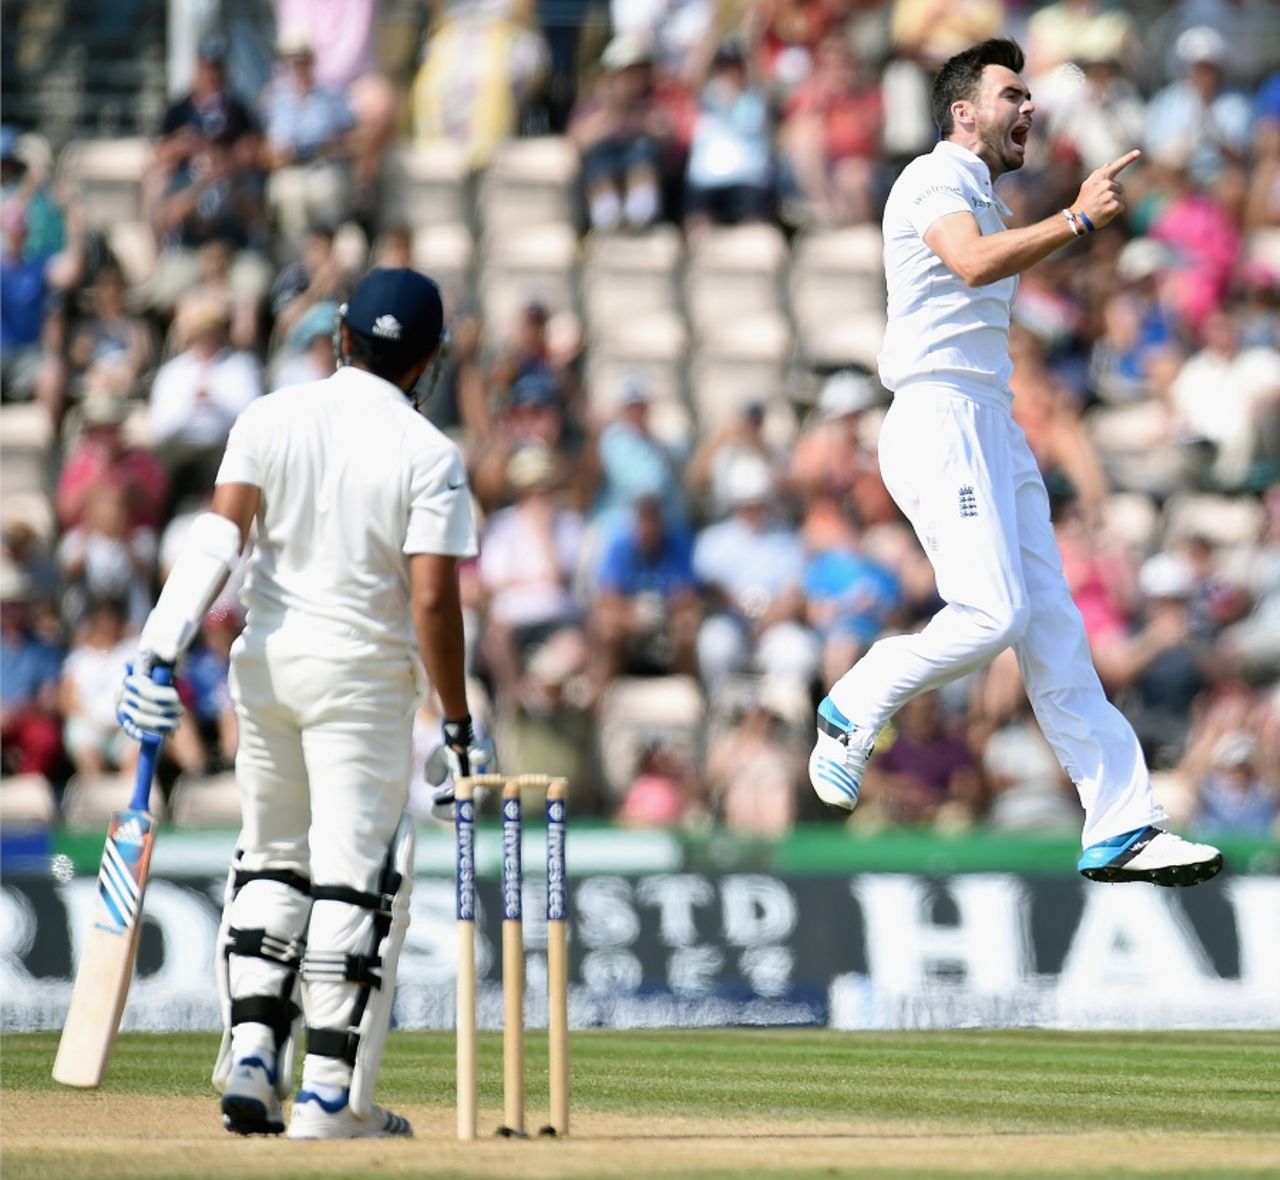 James Anderson removed Rohit Sharma in the second over of the day, England v India, 3rd Investec Test, Ageas Bowl, 5th day, July 31, 2014